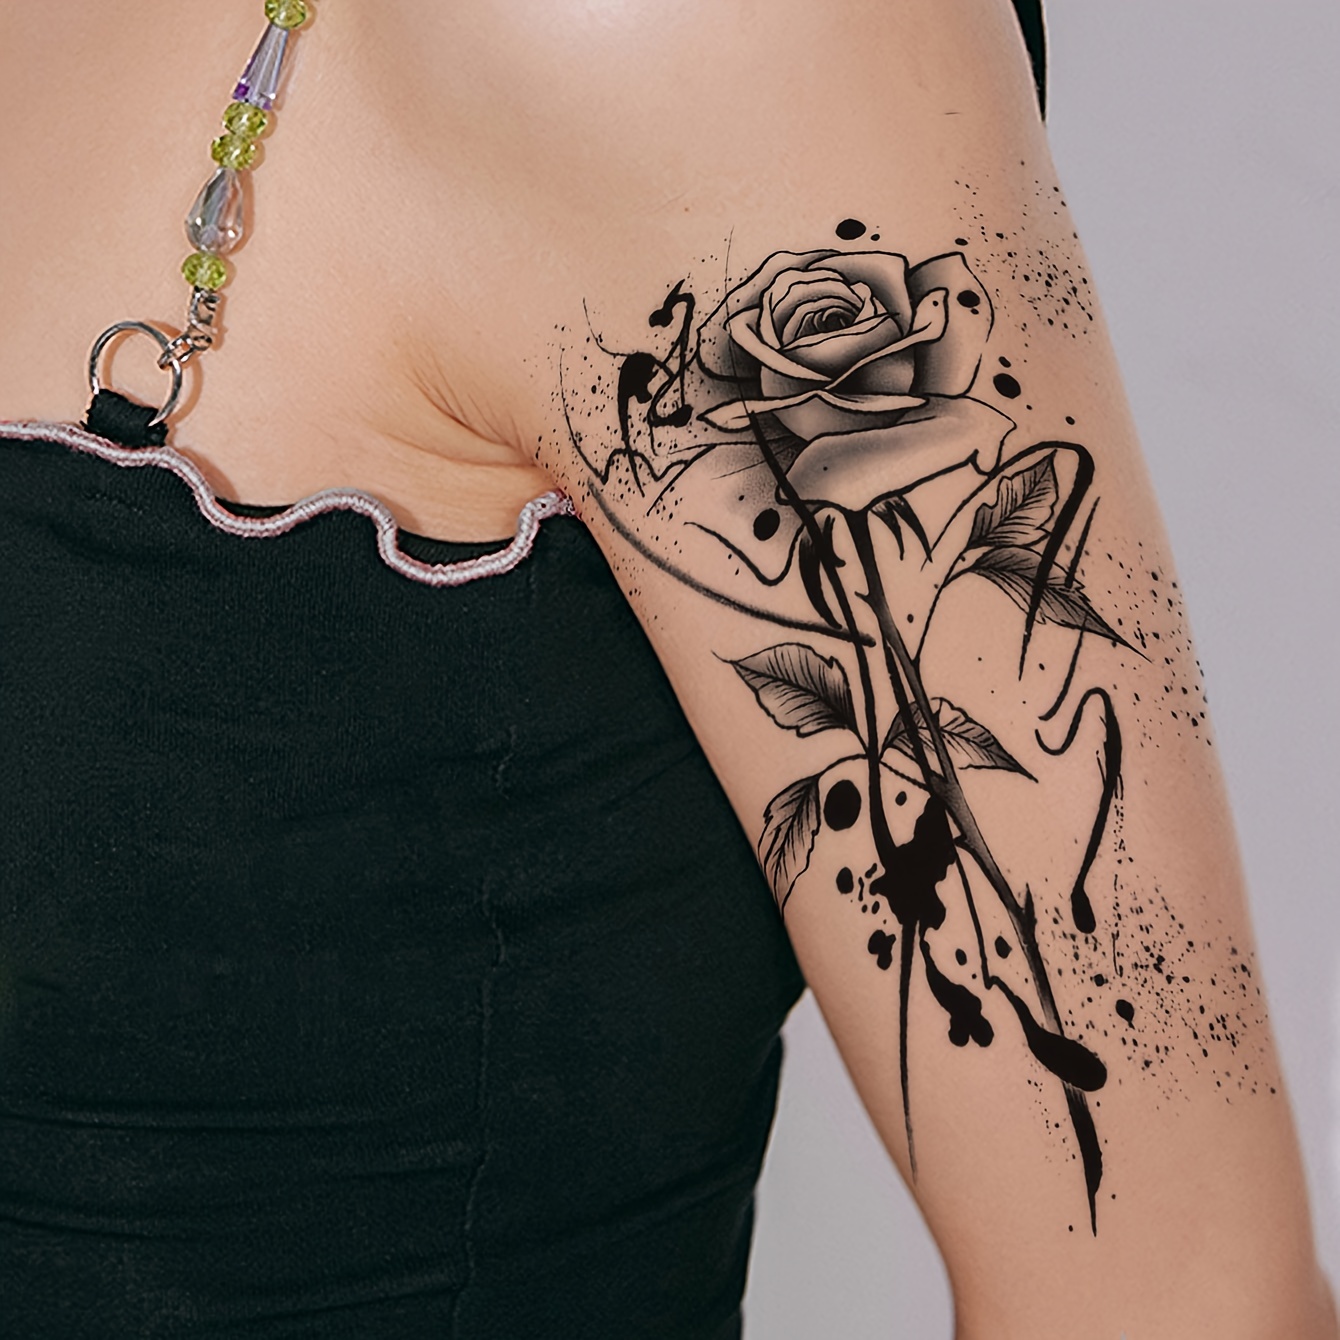 Black Roses and Dragon Wings Best Temporary Tattoos| WannaBeInk.com